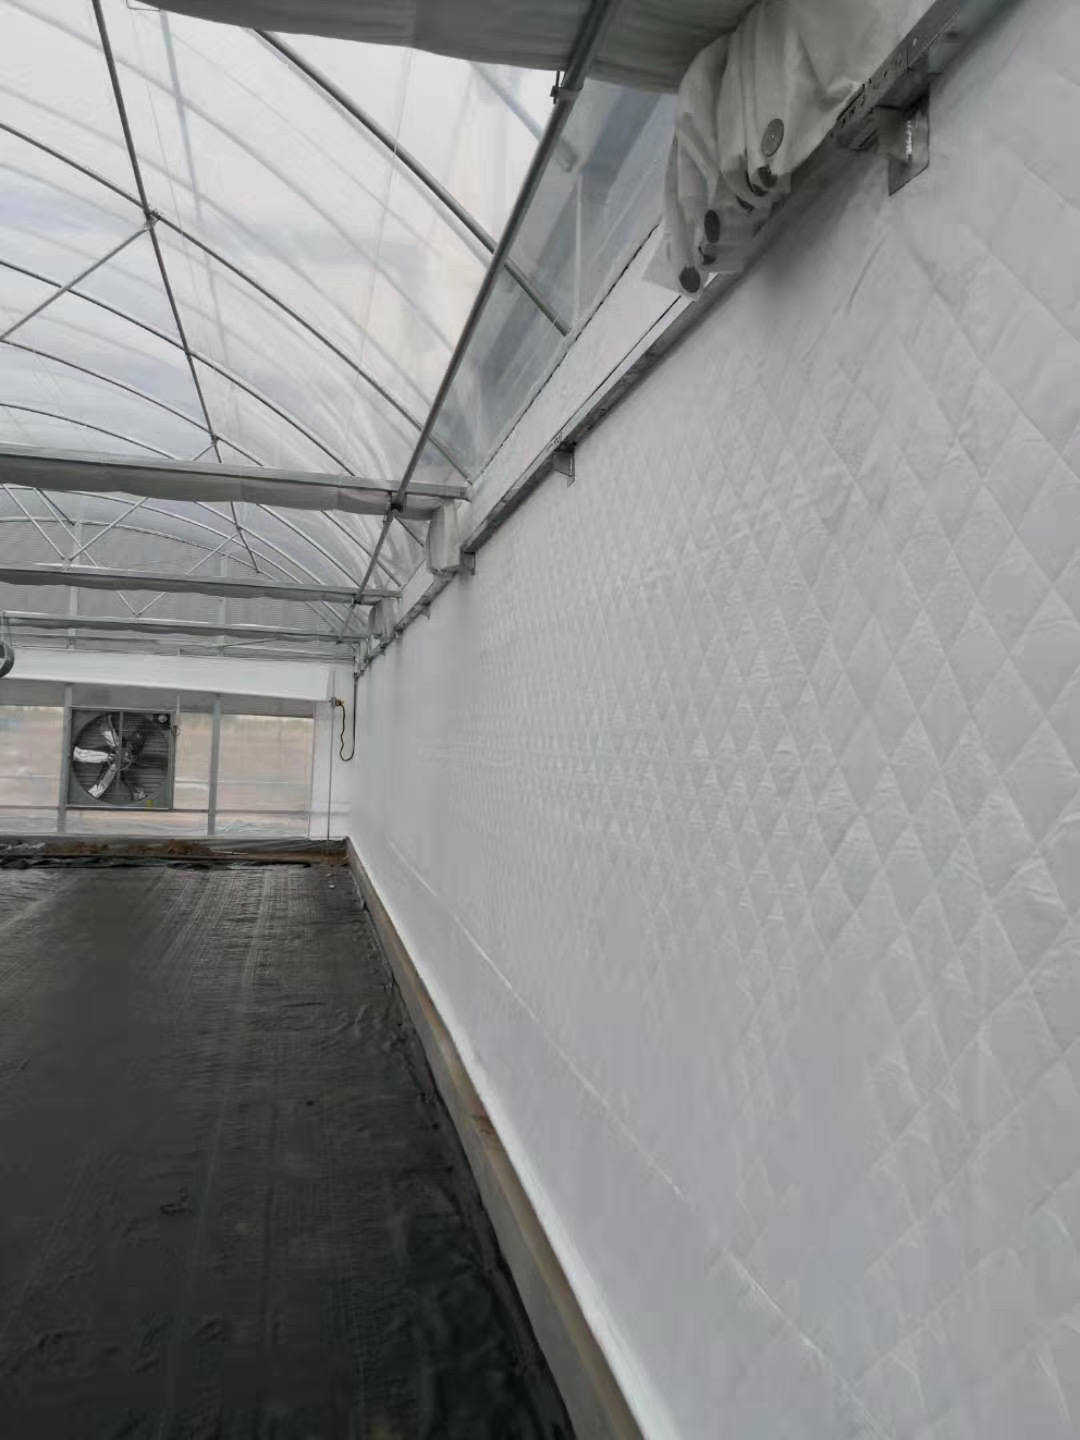 Multiple Greenhouse accessory with galvanized coated